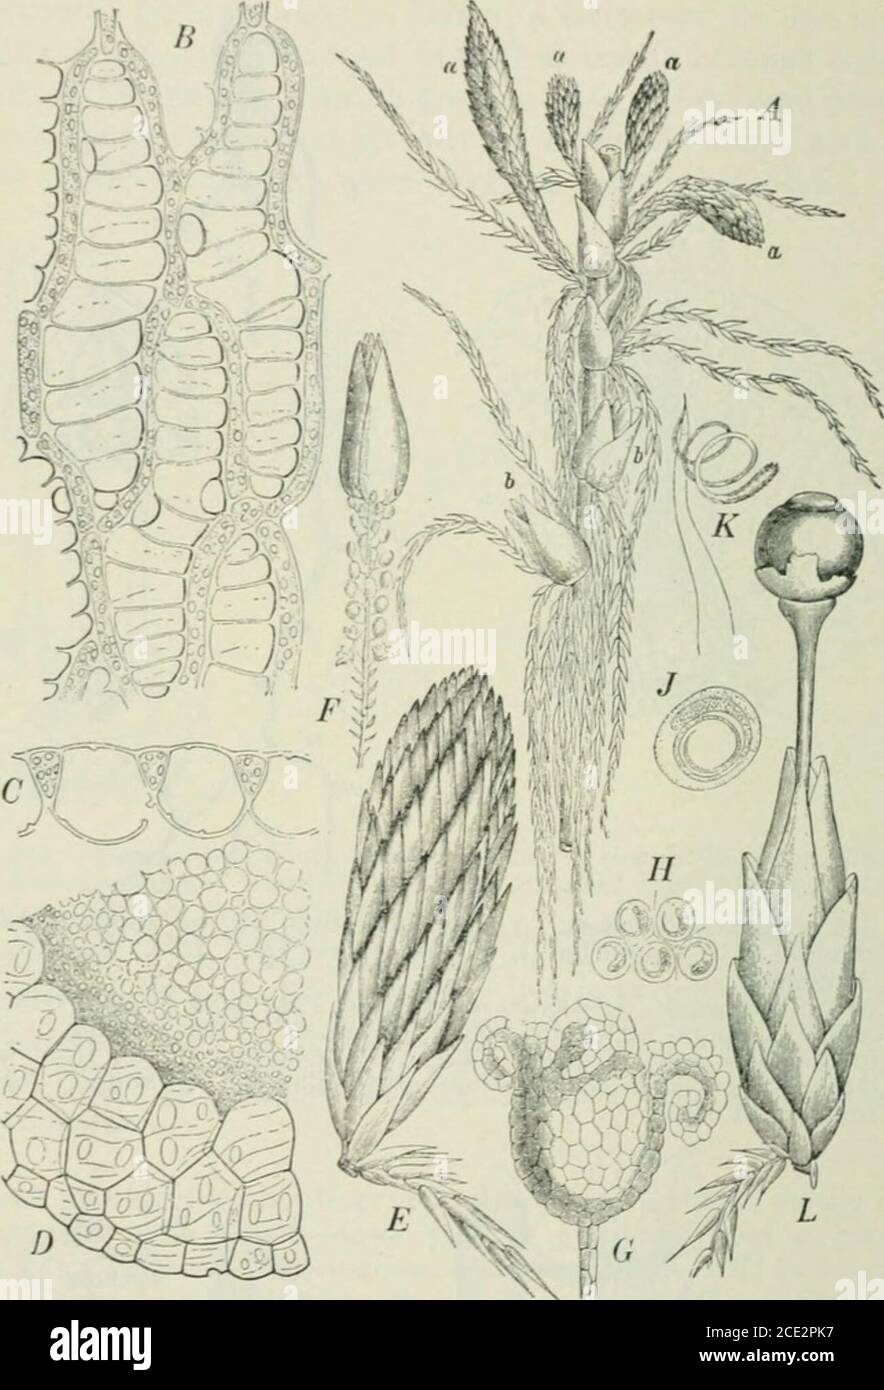 . Plants and their uses; an introduction to botany . 524 LIFE-HISTORIES. Fig. 348.—Peat mosses. ,1, part of a ganietophyte, enlarged, showing malebranches (a, a, n, a) and female branrhes (h, h). B, part of a leaf (.S.cymhifolium), ^l^, showing the net-work of green cells surrounding thelarge ones which fill with water or air. C, vertical section through asmall piece of leaf (6. cuspidatum) showing the small and the largeperforated cells, f. D, cross-section through outer part of stem(S. cymhifolium) highly magnified. E, male branch of .S. acutifolium,with a vegetative branch at the base, ^,. Stock Photo